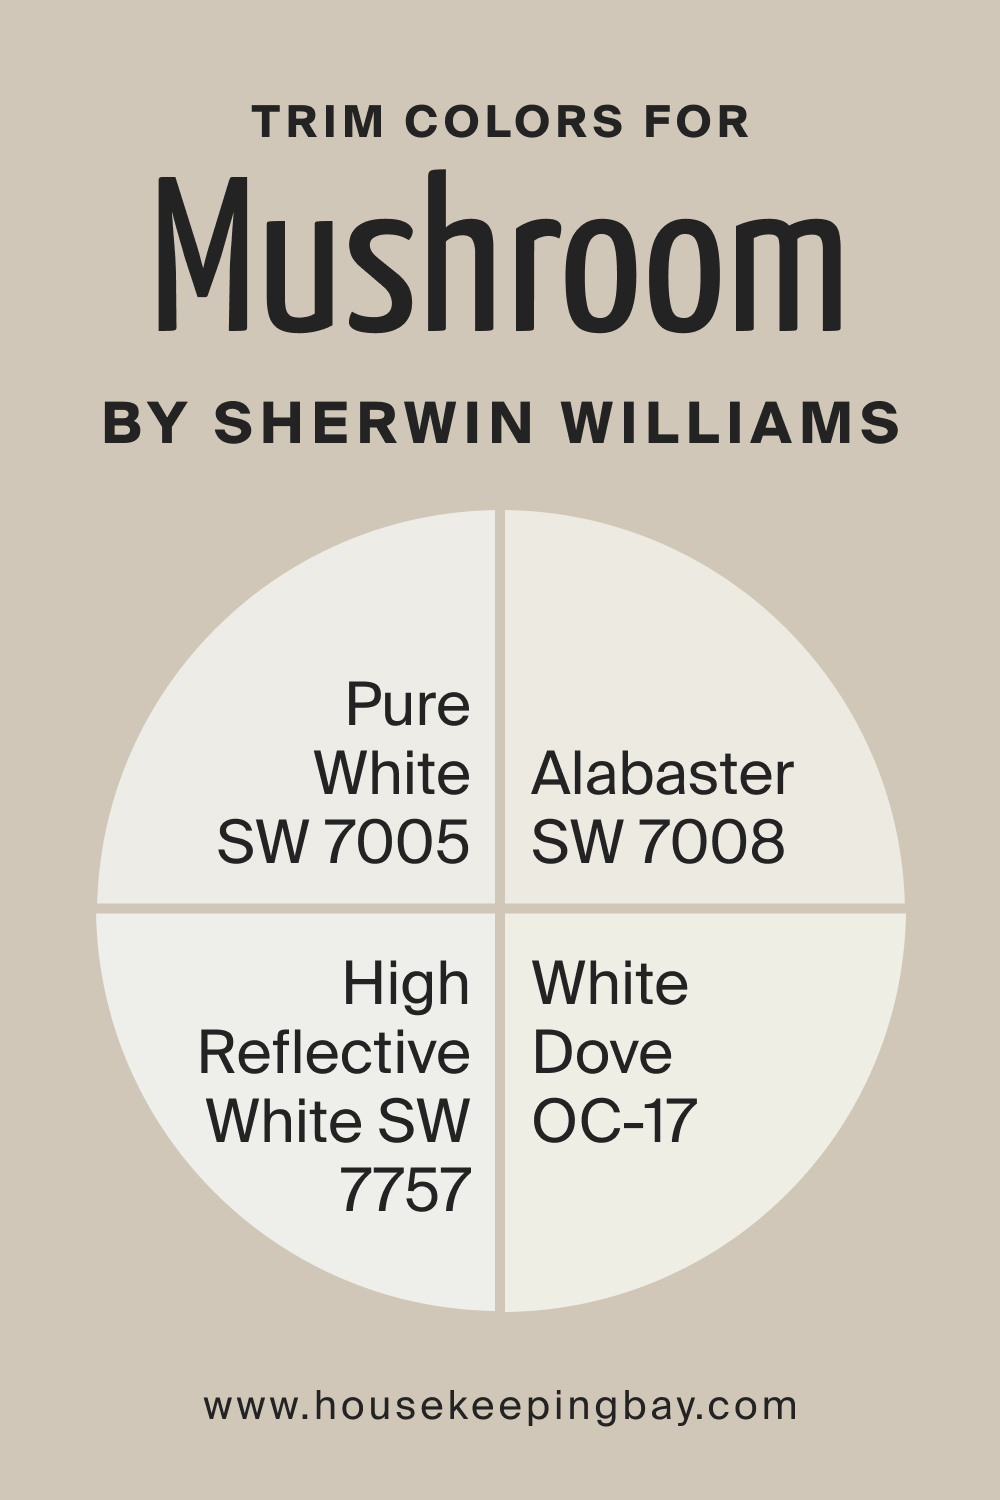 Trim Colors for SW Mushroom by Sherwin Williams